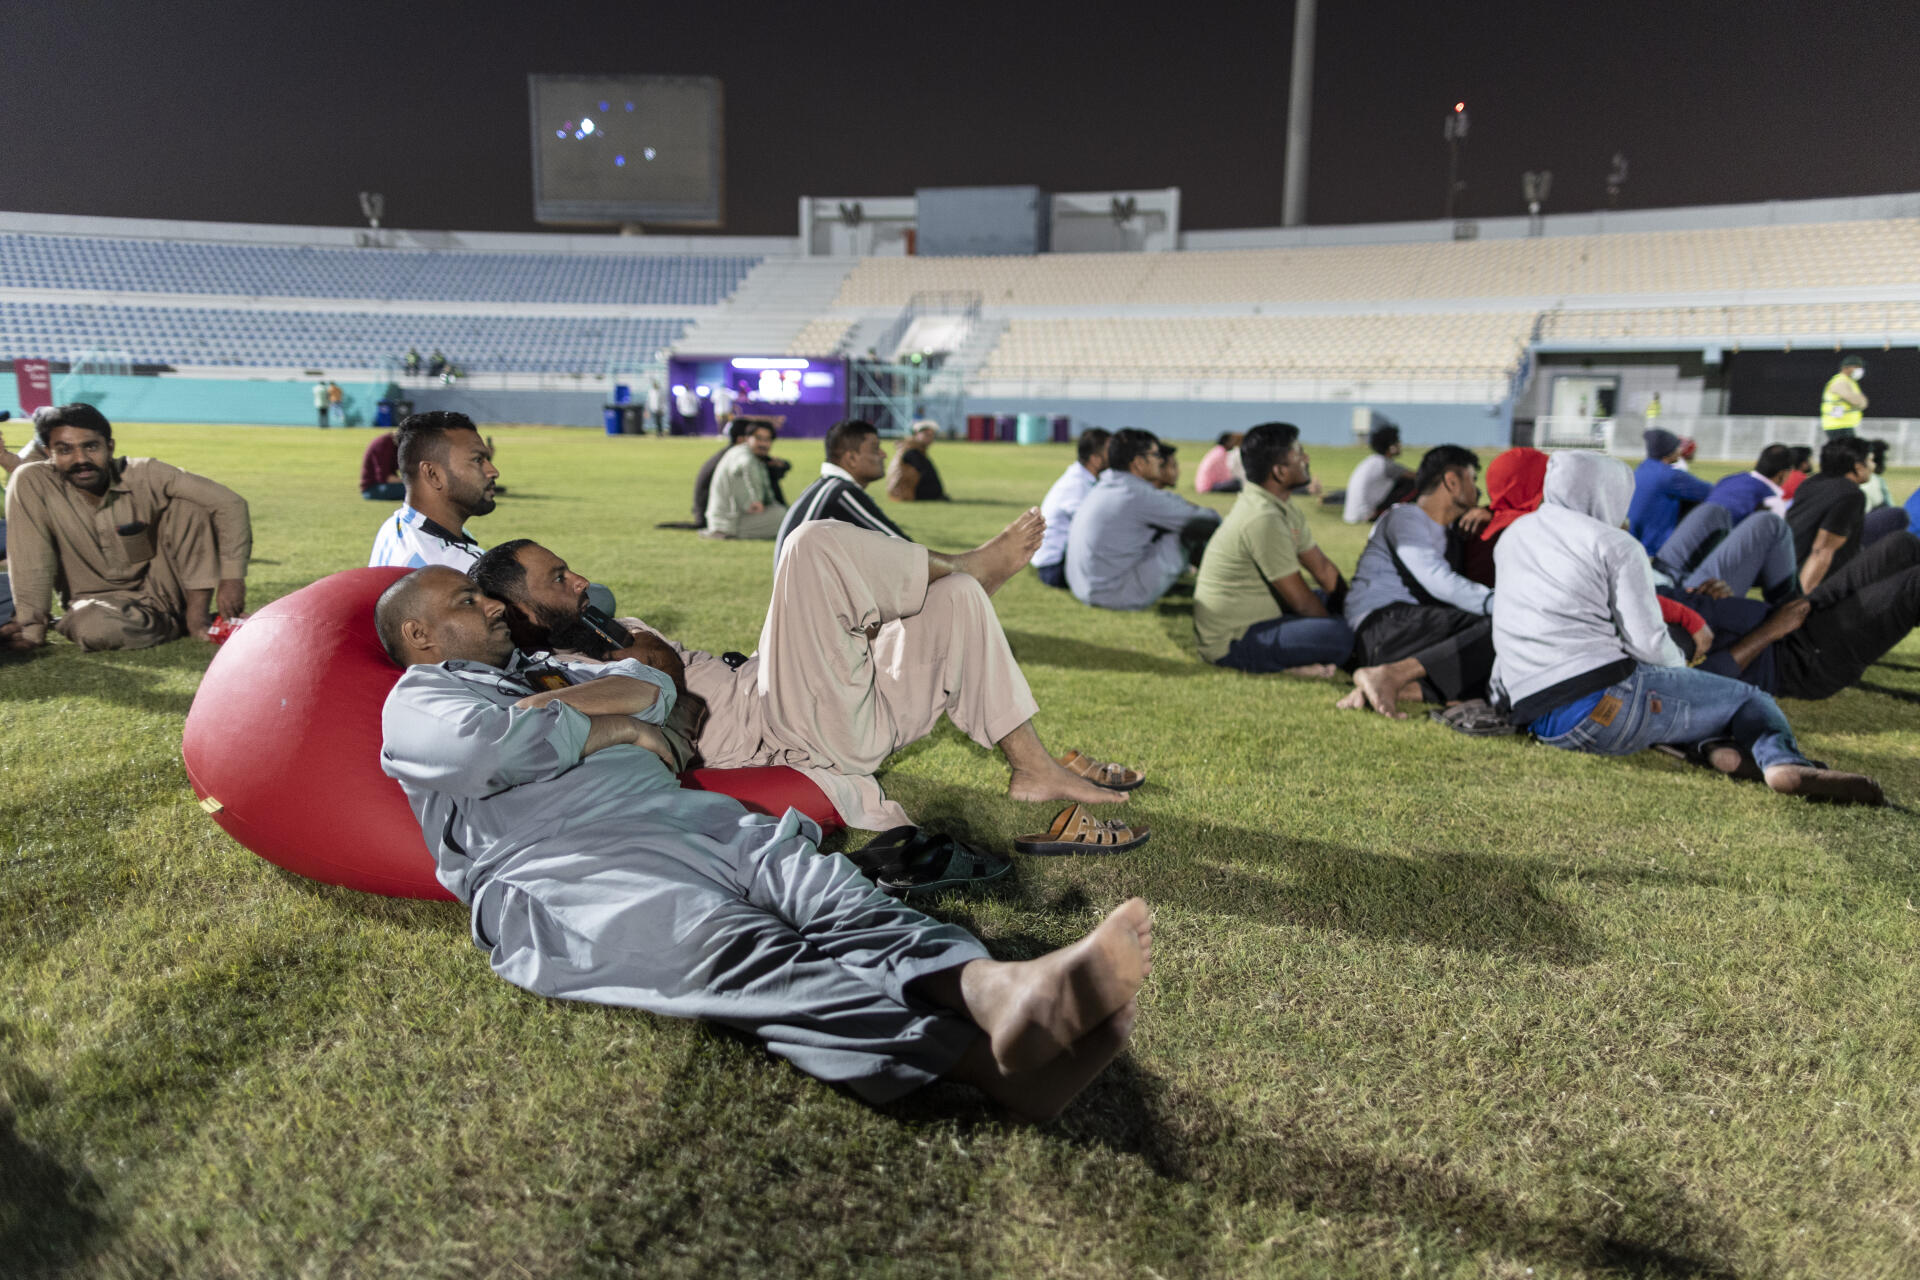 Inside the fan zone, during the Poland-Mexico match, in Doha, Qatar, on November 8, 2022.